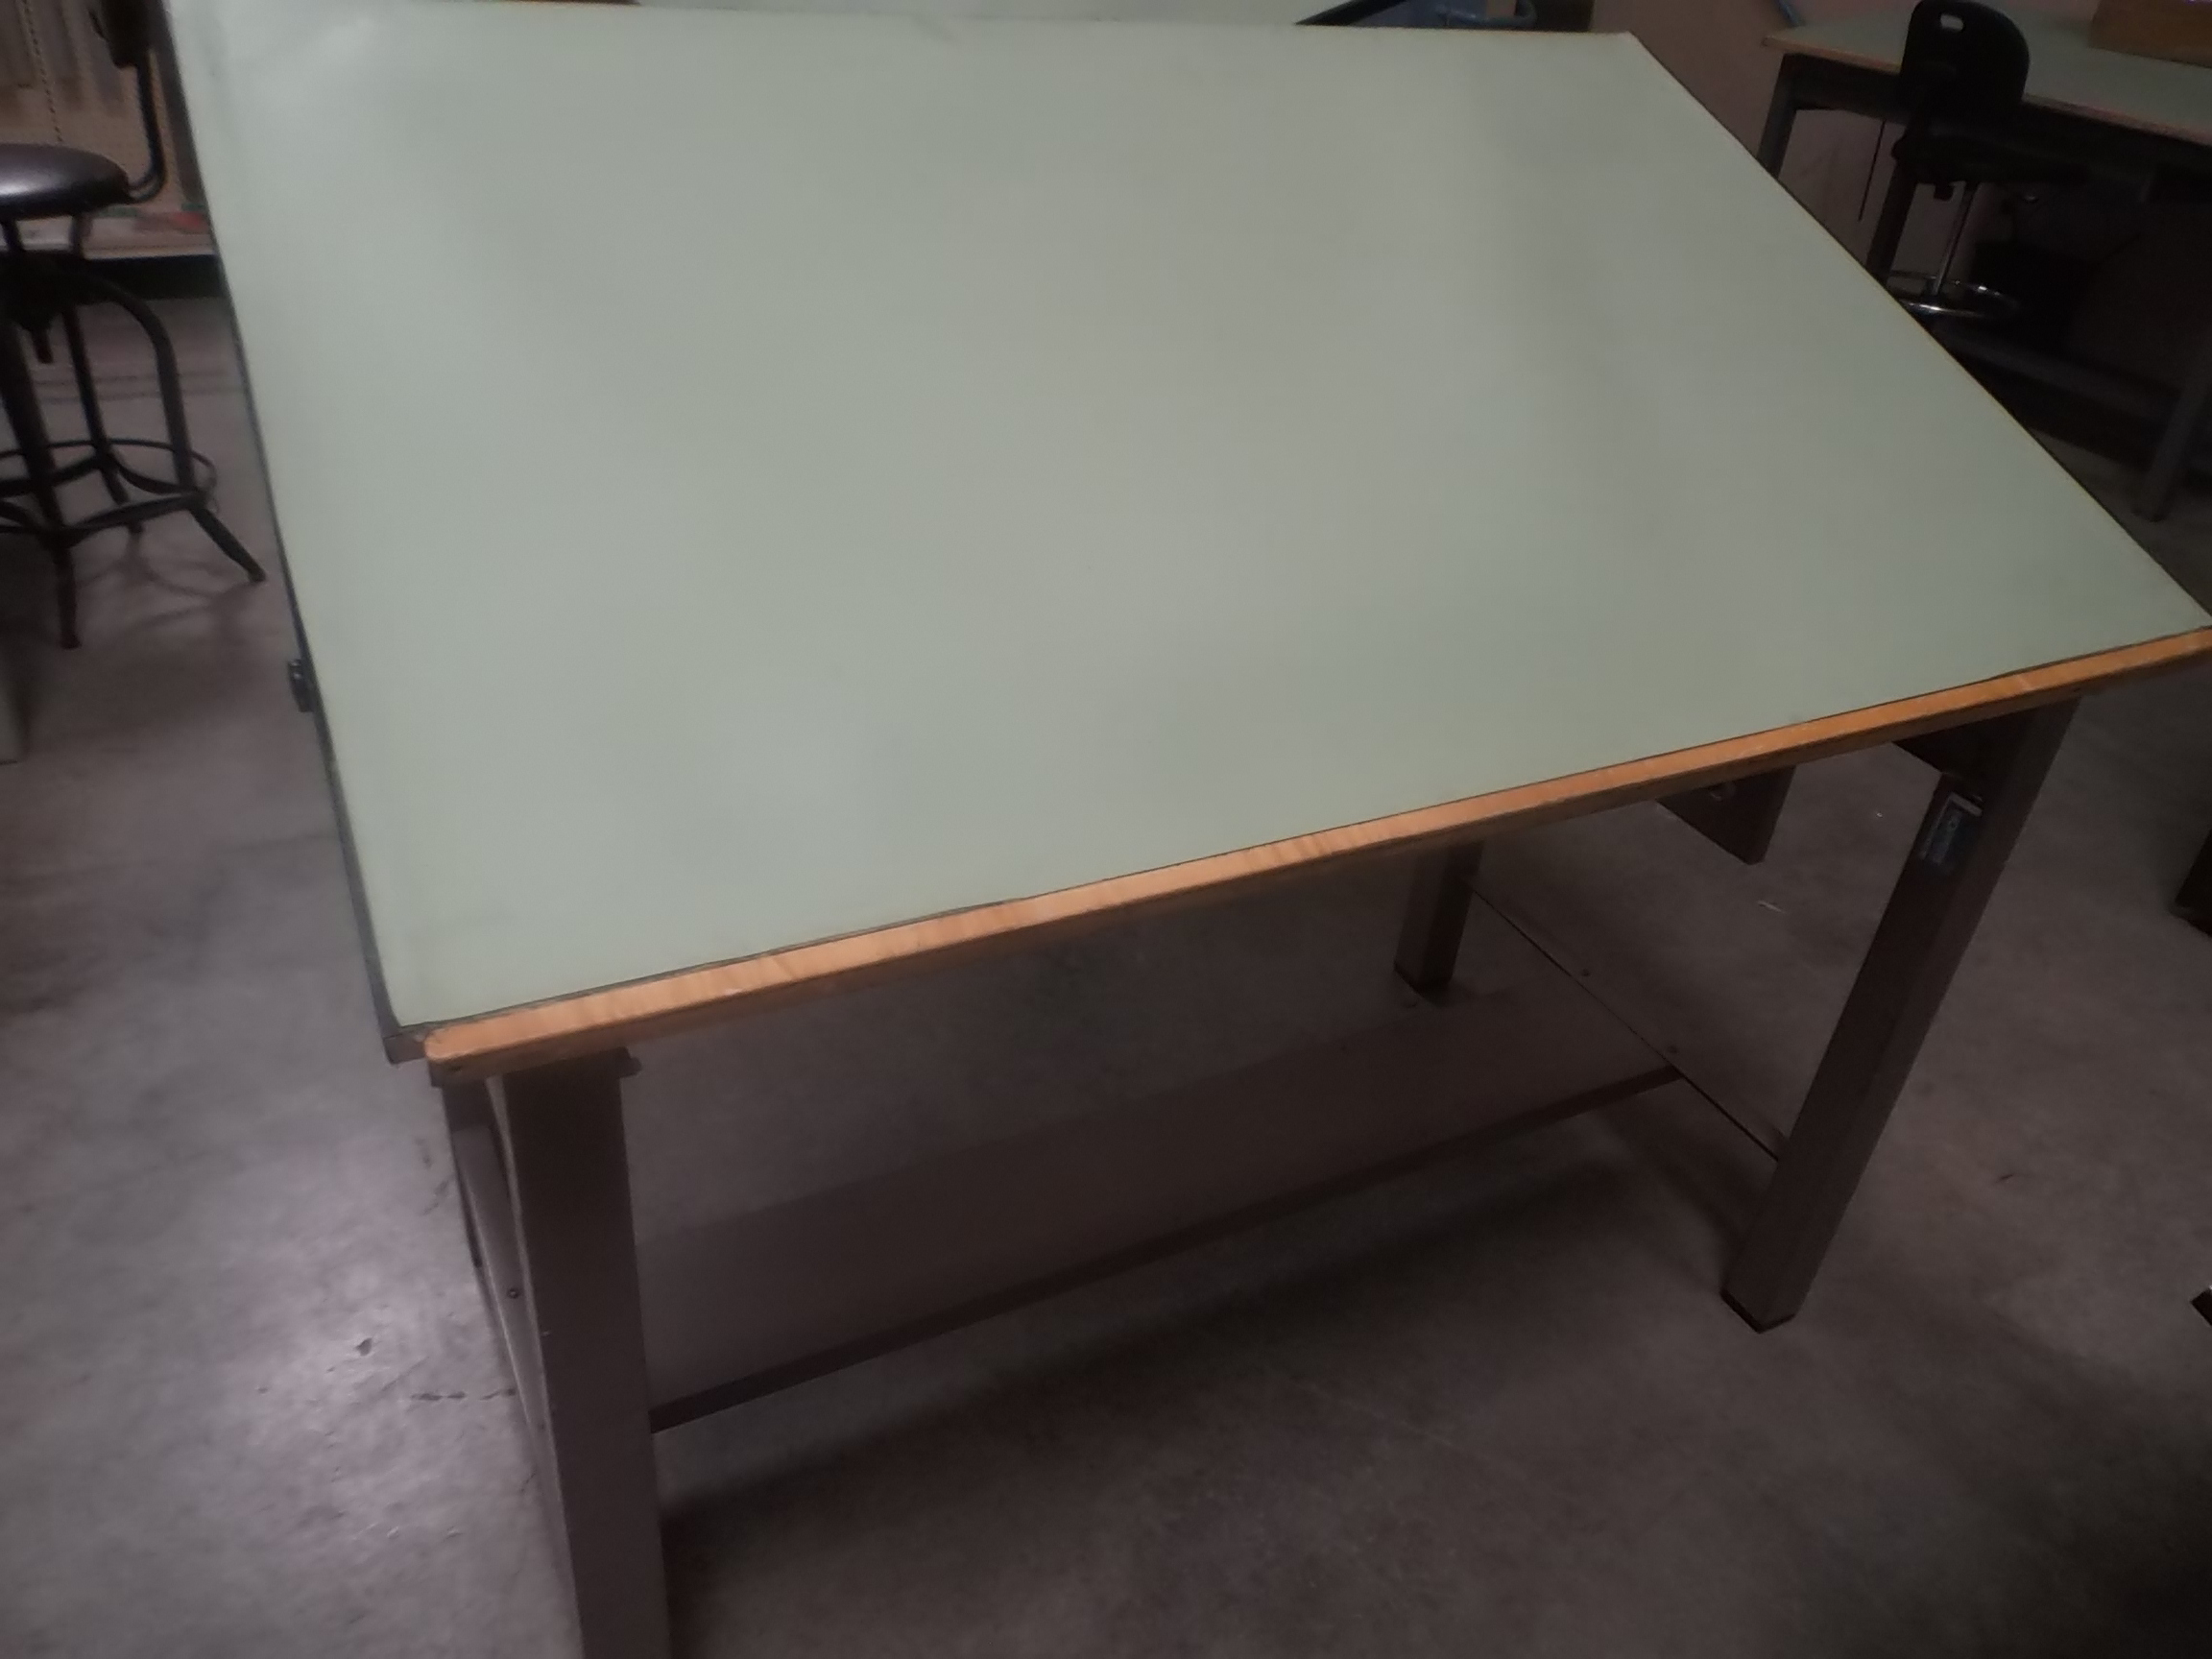 Sold at Auction: Small Vintage Drafting Table or Drawing Board.